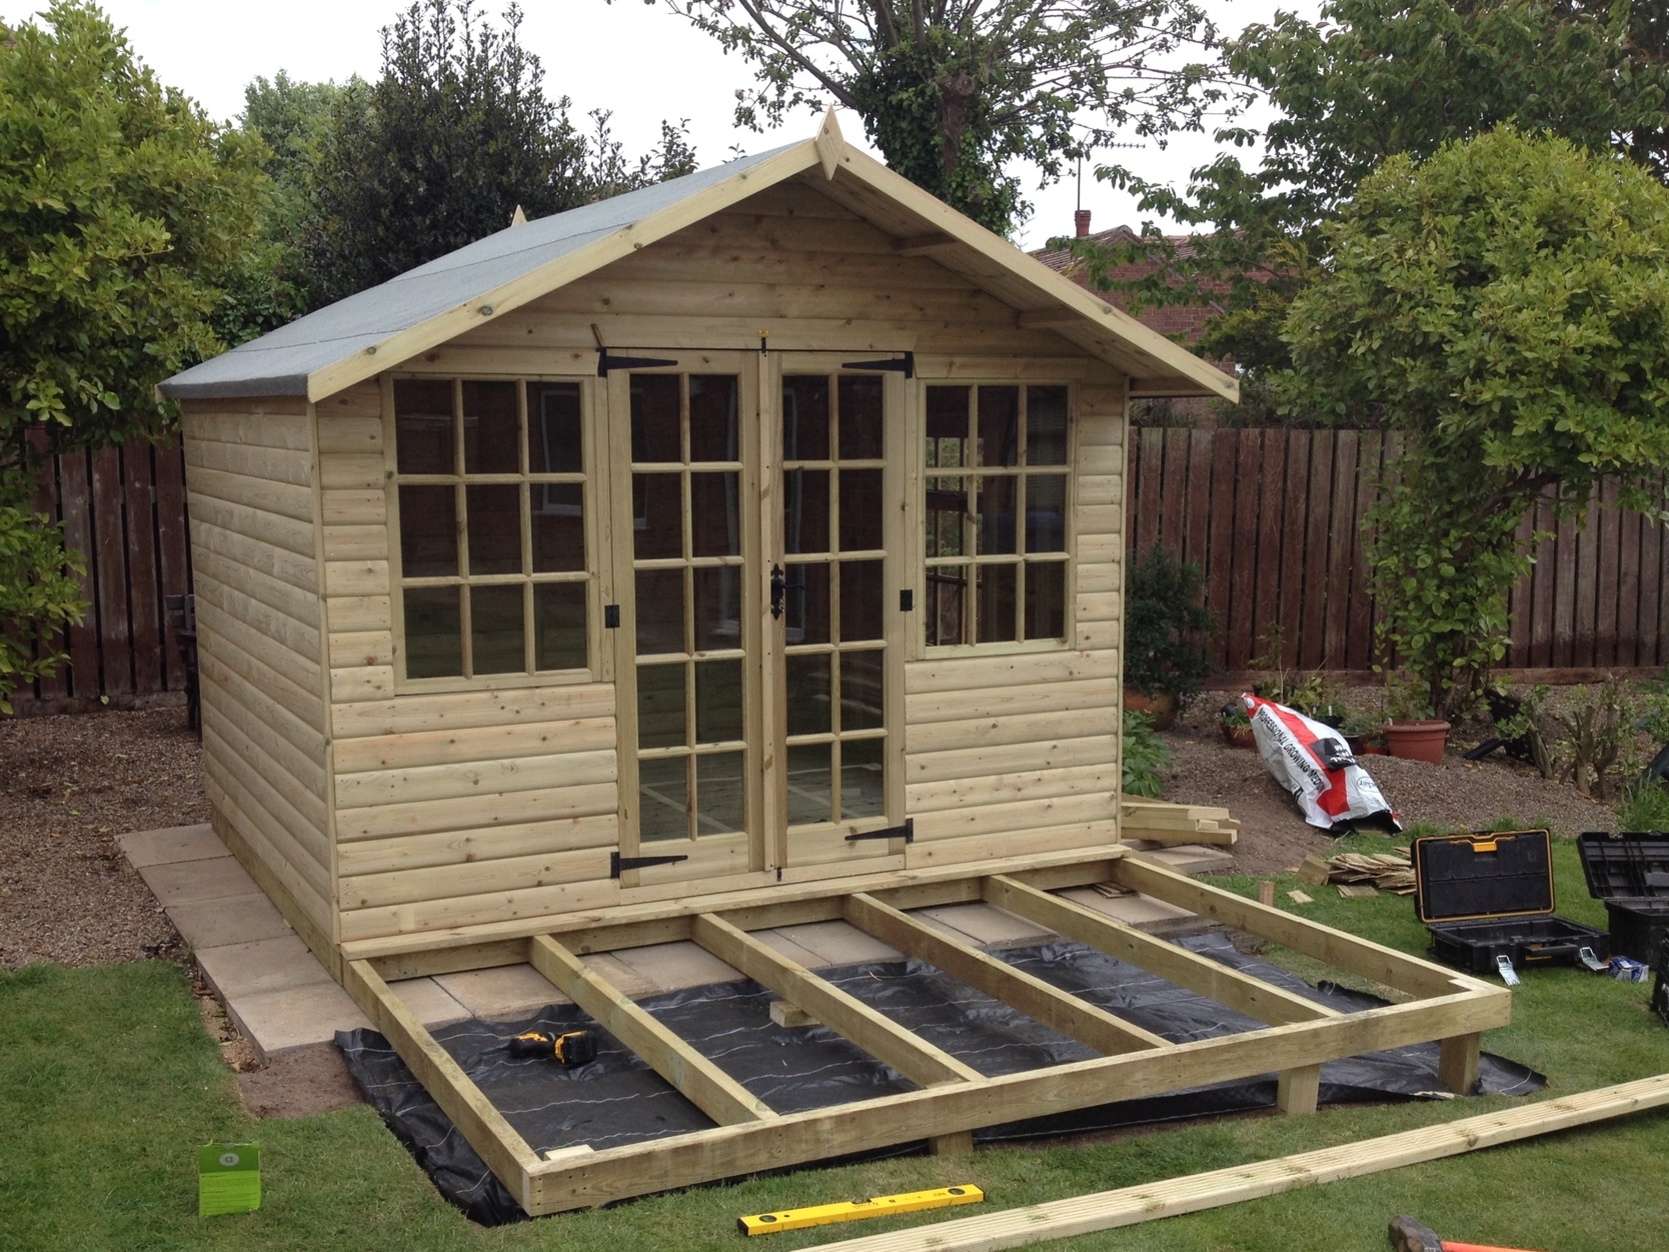 A brand new shed in a garden